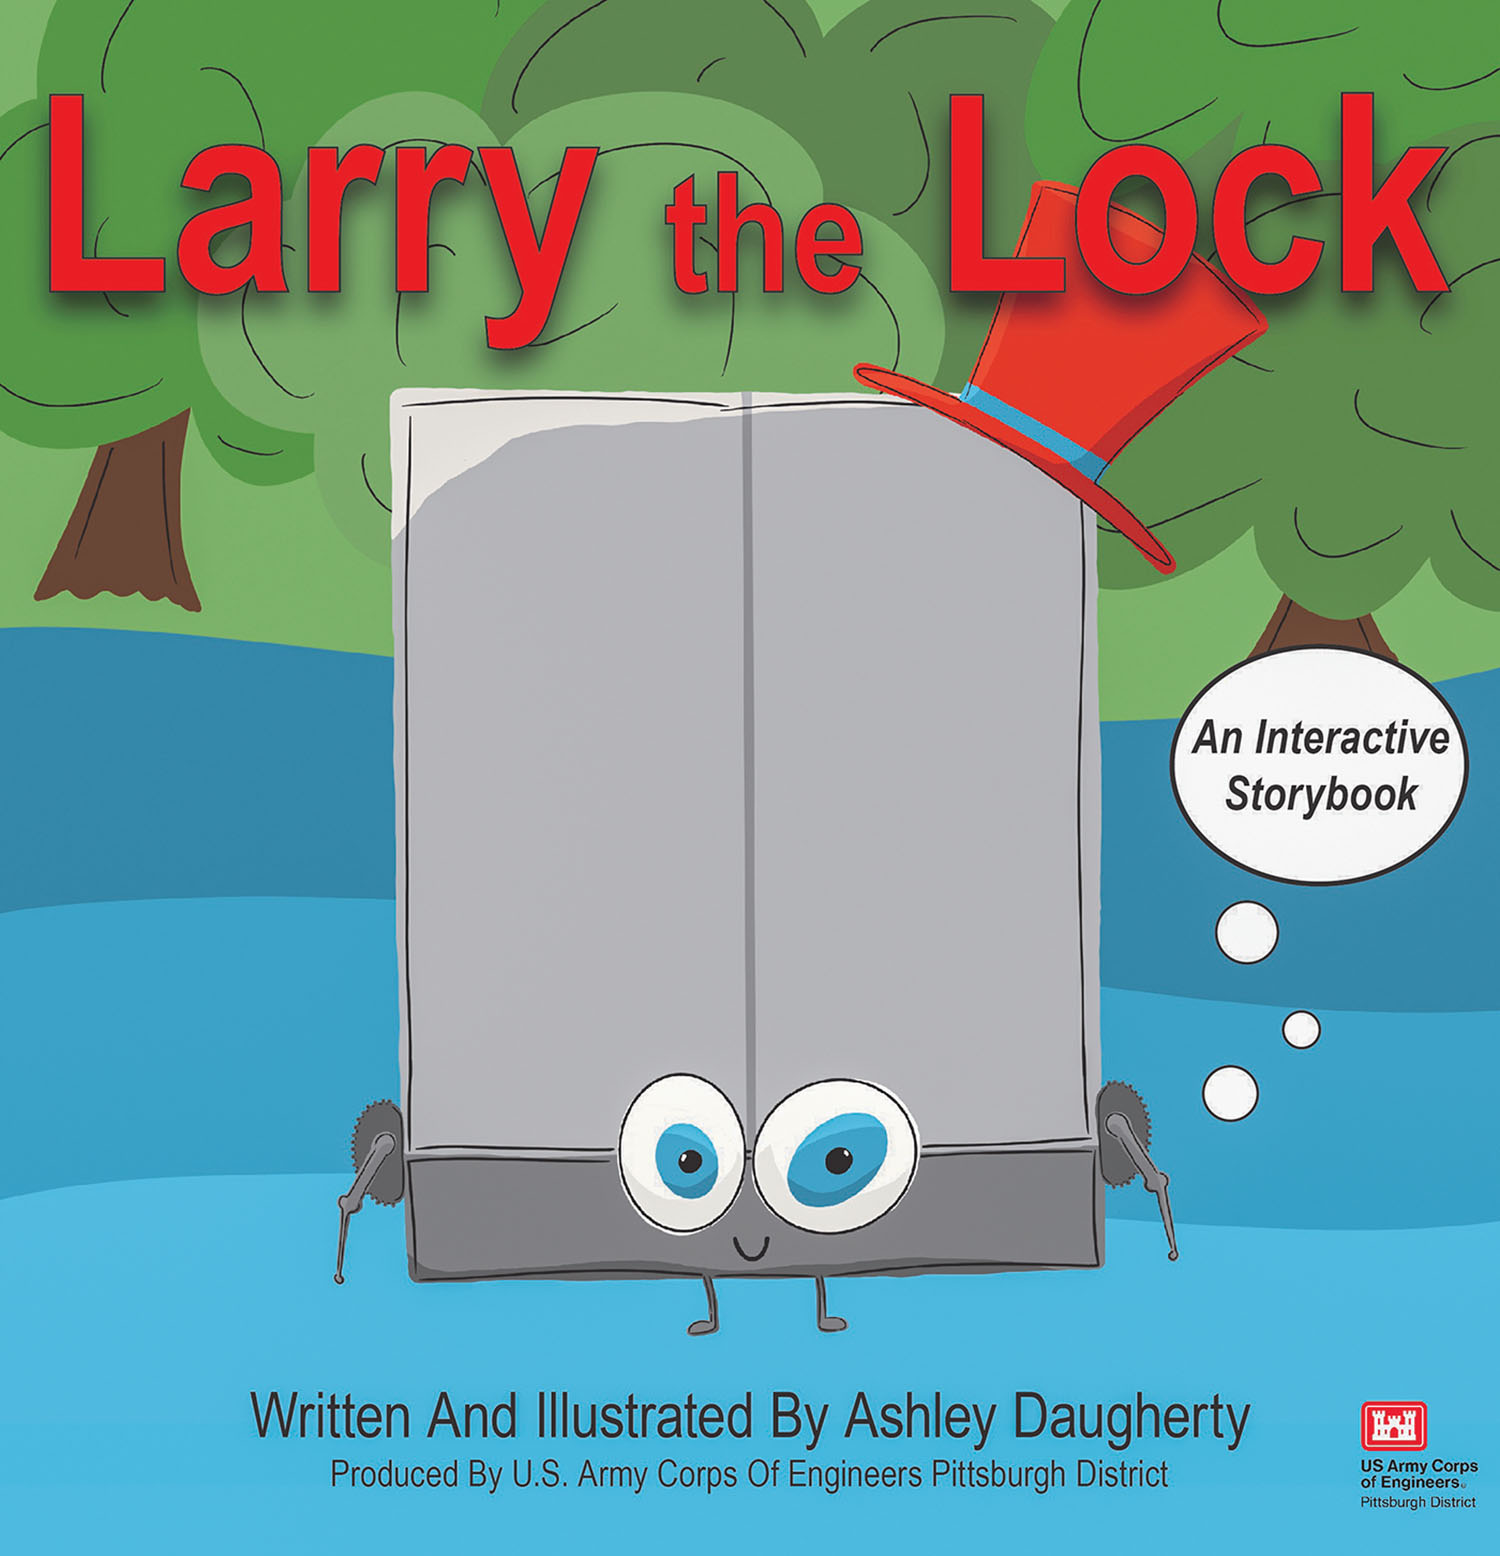 Larry the Lock is a children’s book written and illustrated by Ashley Daugherty to illustrate the work locks perform on the river within the district. Daugherty has always had a love for art and reading. While pursuing a Bachelor of Fine Arts degree in graphic design, she had the chance to work as an intern at the Pittsburgh Engineer District. Daugherty wanted to make the mission of a lock more understandable, especially to children. (Illustration by Ashley Daugherty)